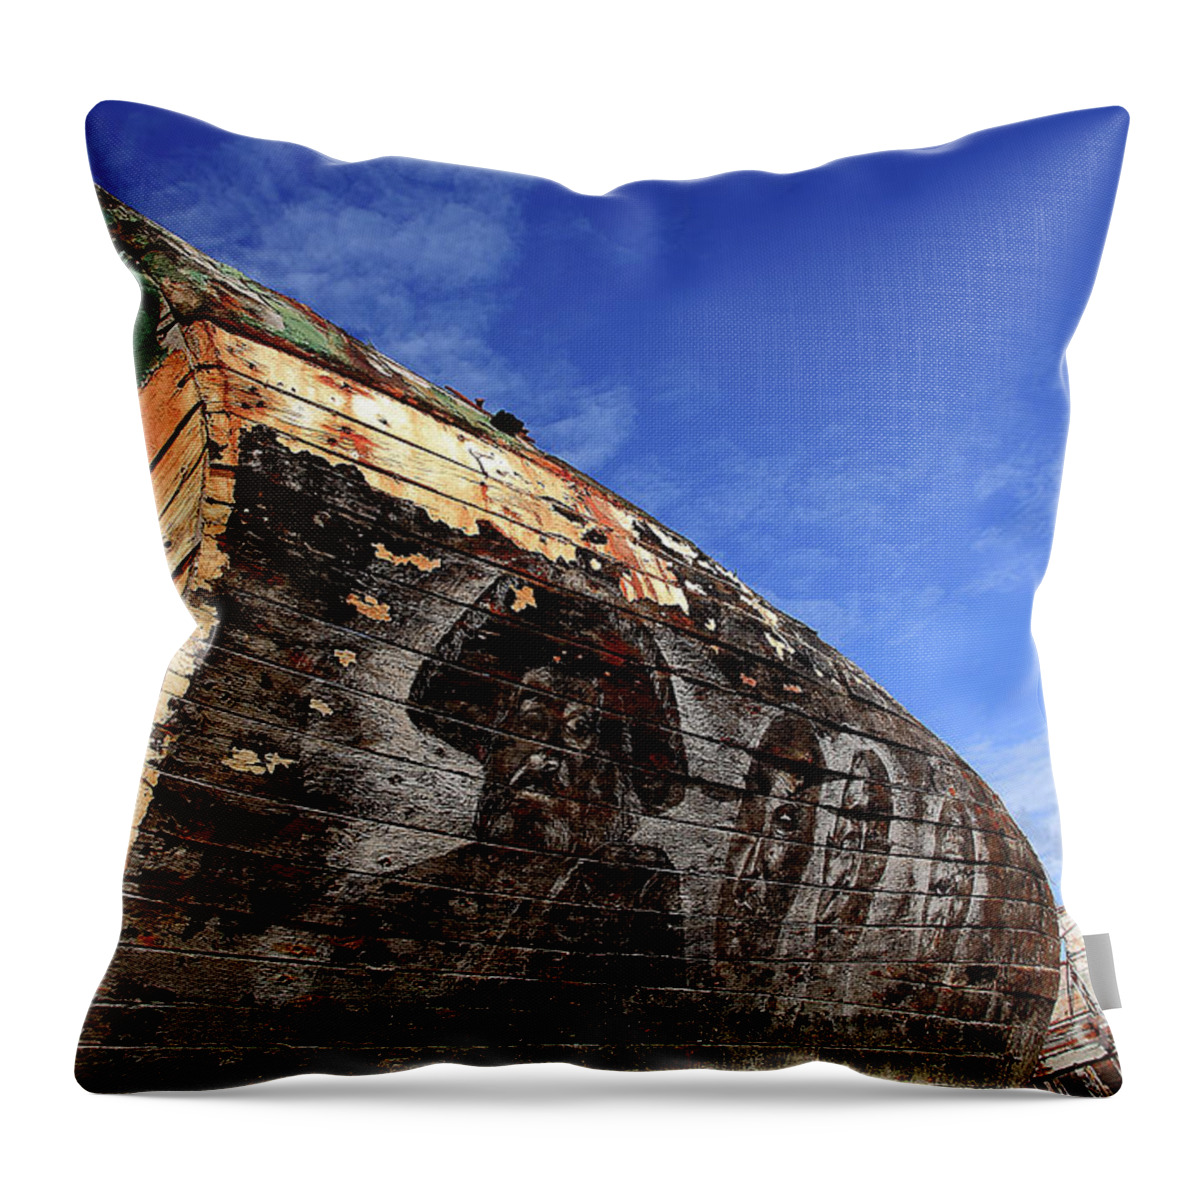 Pirate Throw Pillow featuring the photograph Pirates of the oceans by Frederic Bourrigaud